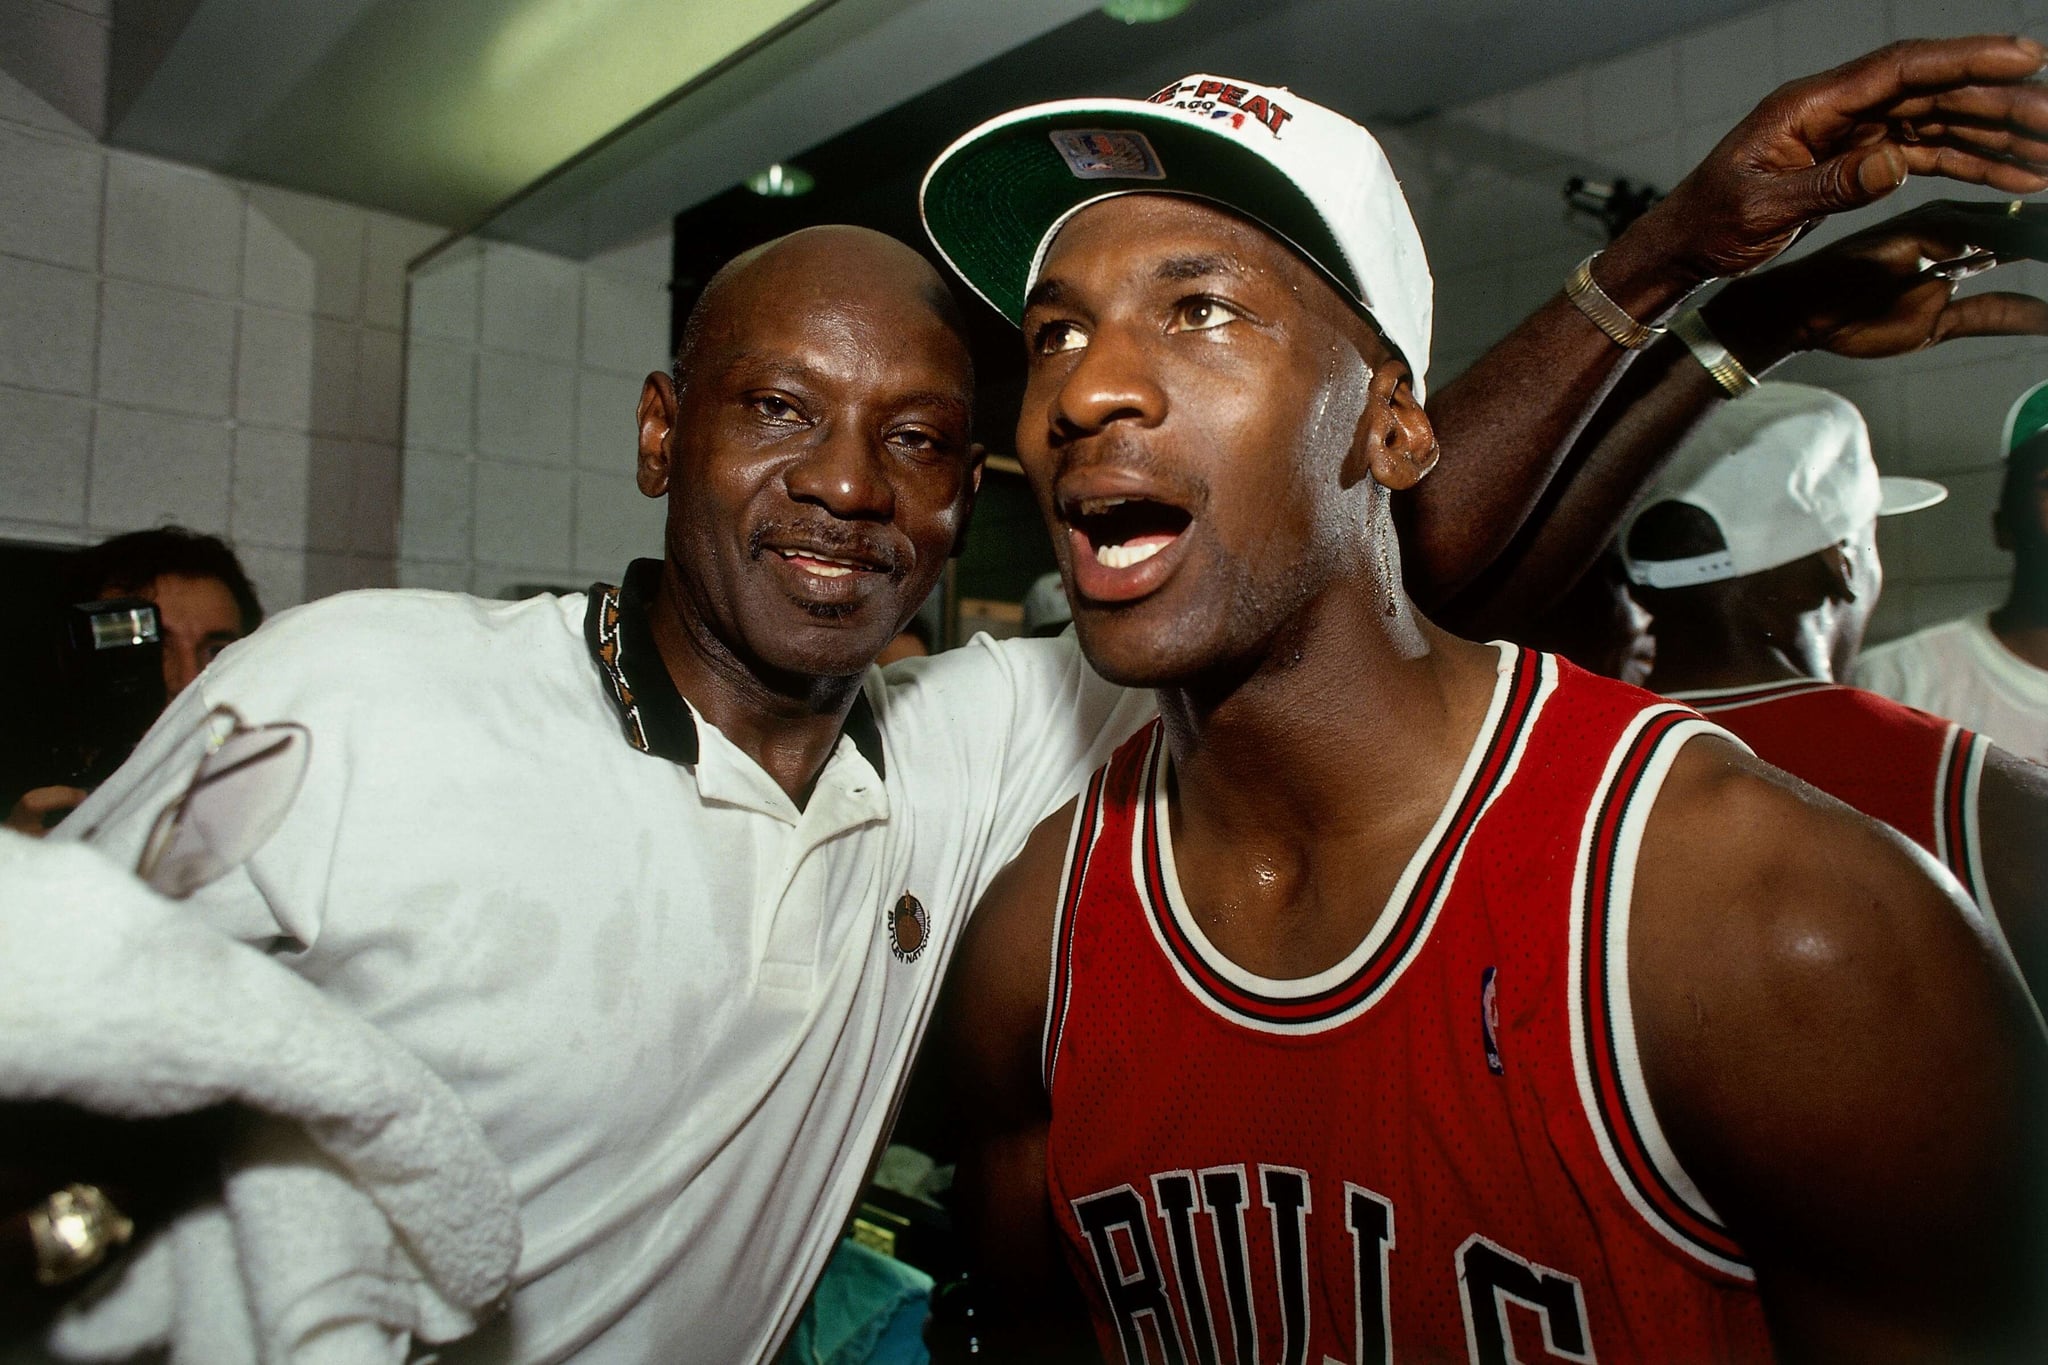 PHOENIX - JUNE 20:  Michael Jordan #23 of the Chicago Bulls celebrates winning the NBA Championship with his father after Game Six of the 1993 NBA Finals on June 20, 1993 at th America West Arena in Phoenix, Arizona.  The Bulls won 99-98.  NOTE TO USER: User expressly acknowledges and agrees that, by downloading and/or using this Photograph, user is consenting to the terms and conditions of the Getty Images License Agreement. Mandatory Copyright Notice: Copyright 1993 NBAE  (Photo by Andrew D. Bernstein/NBAE via Getty Images)